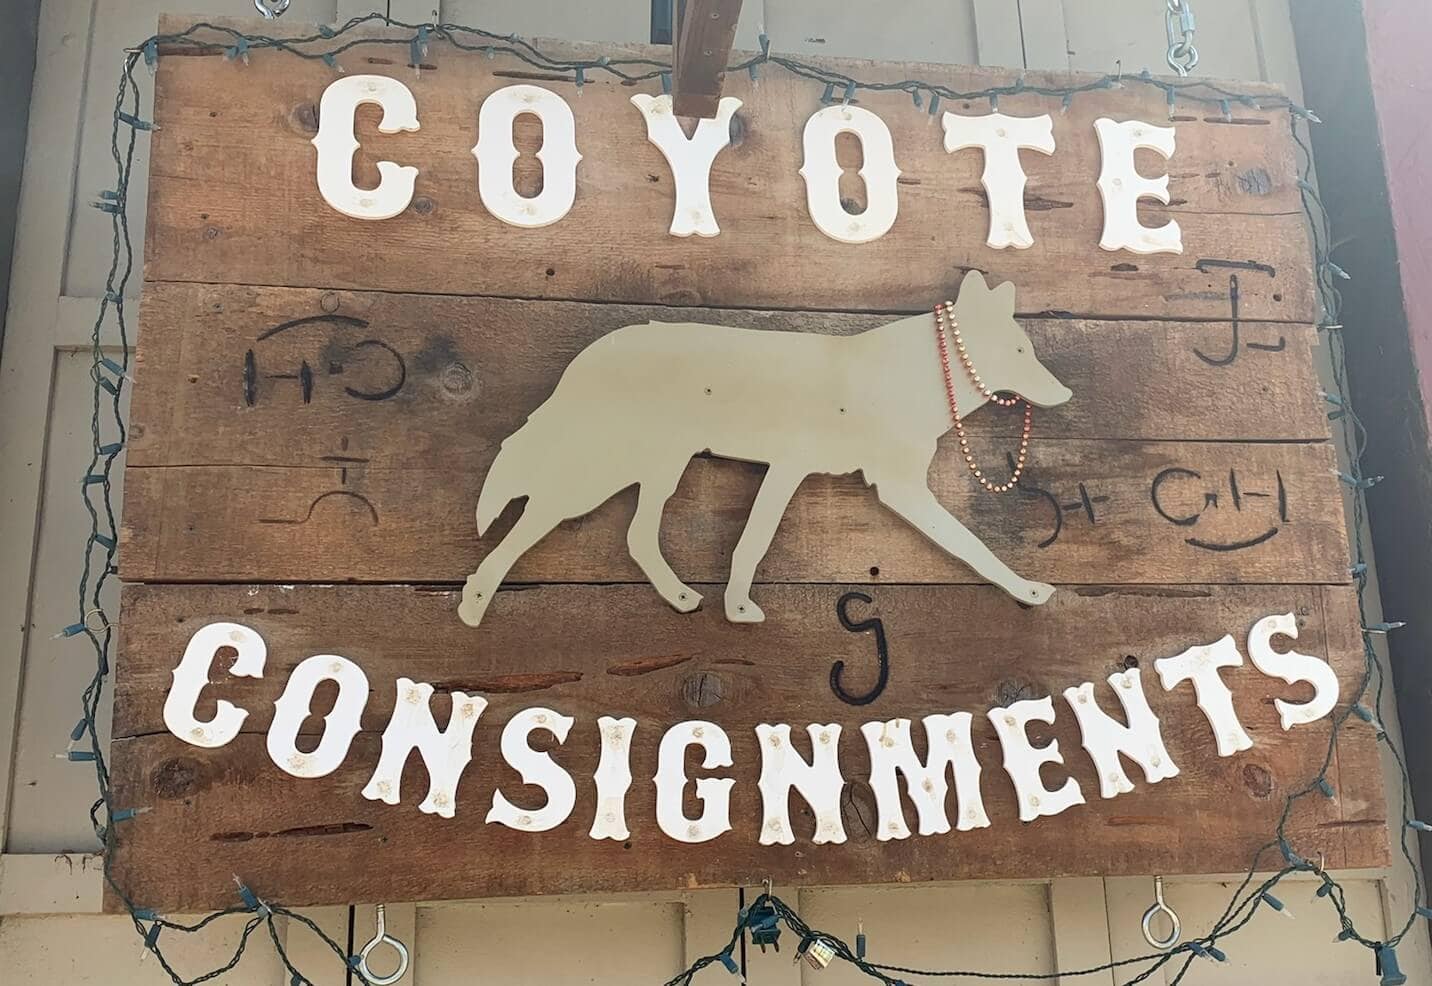 Coyote Consignment